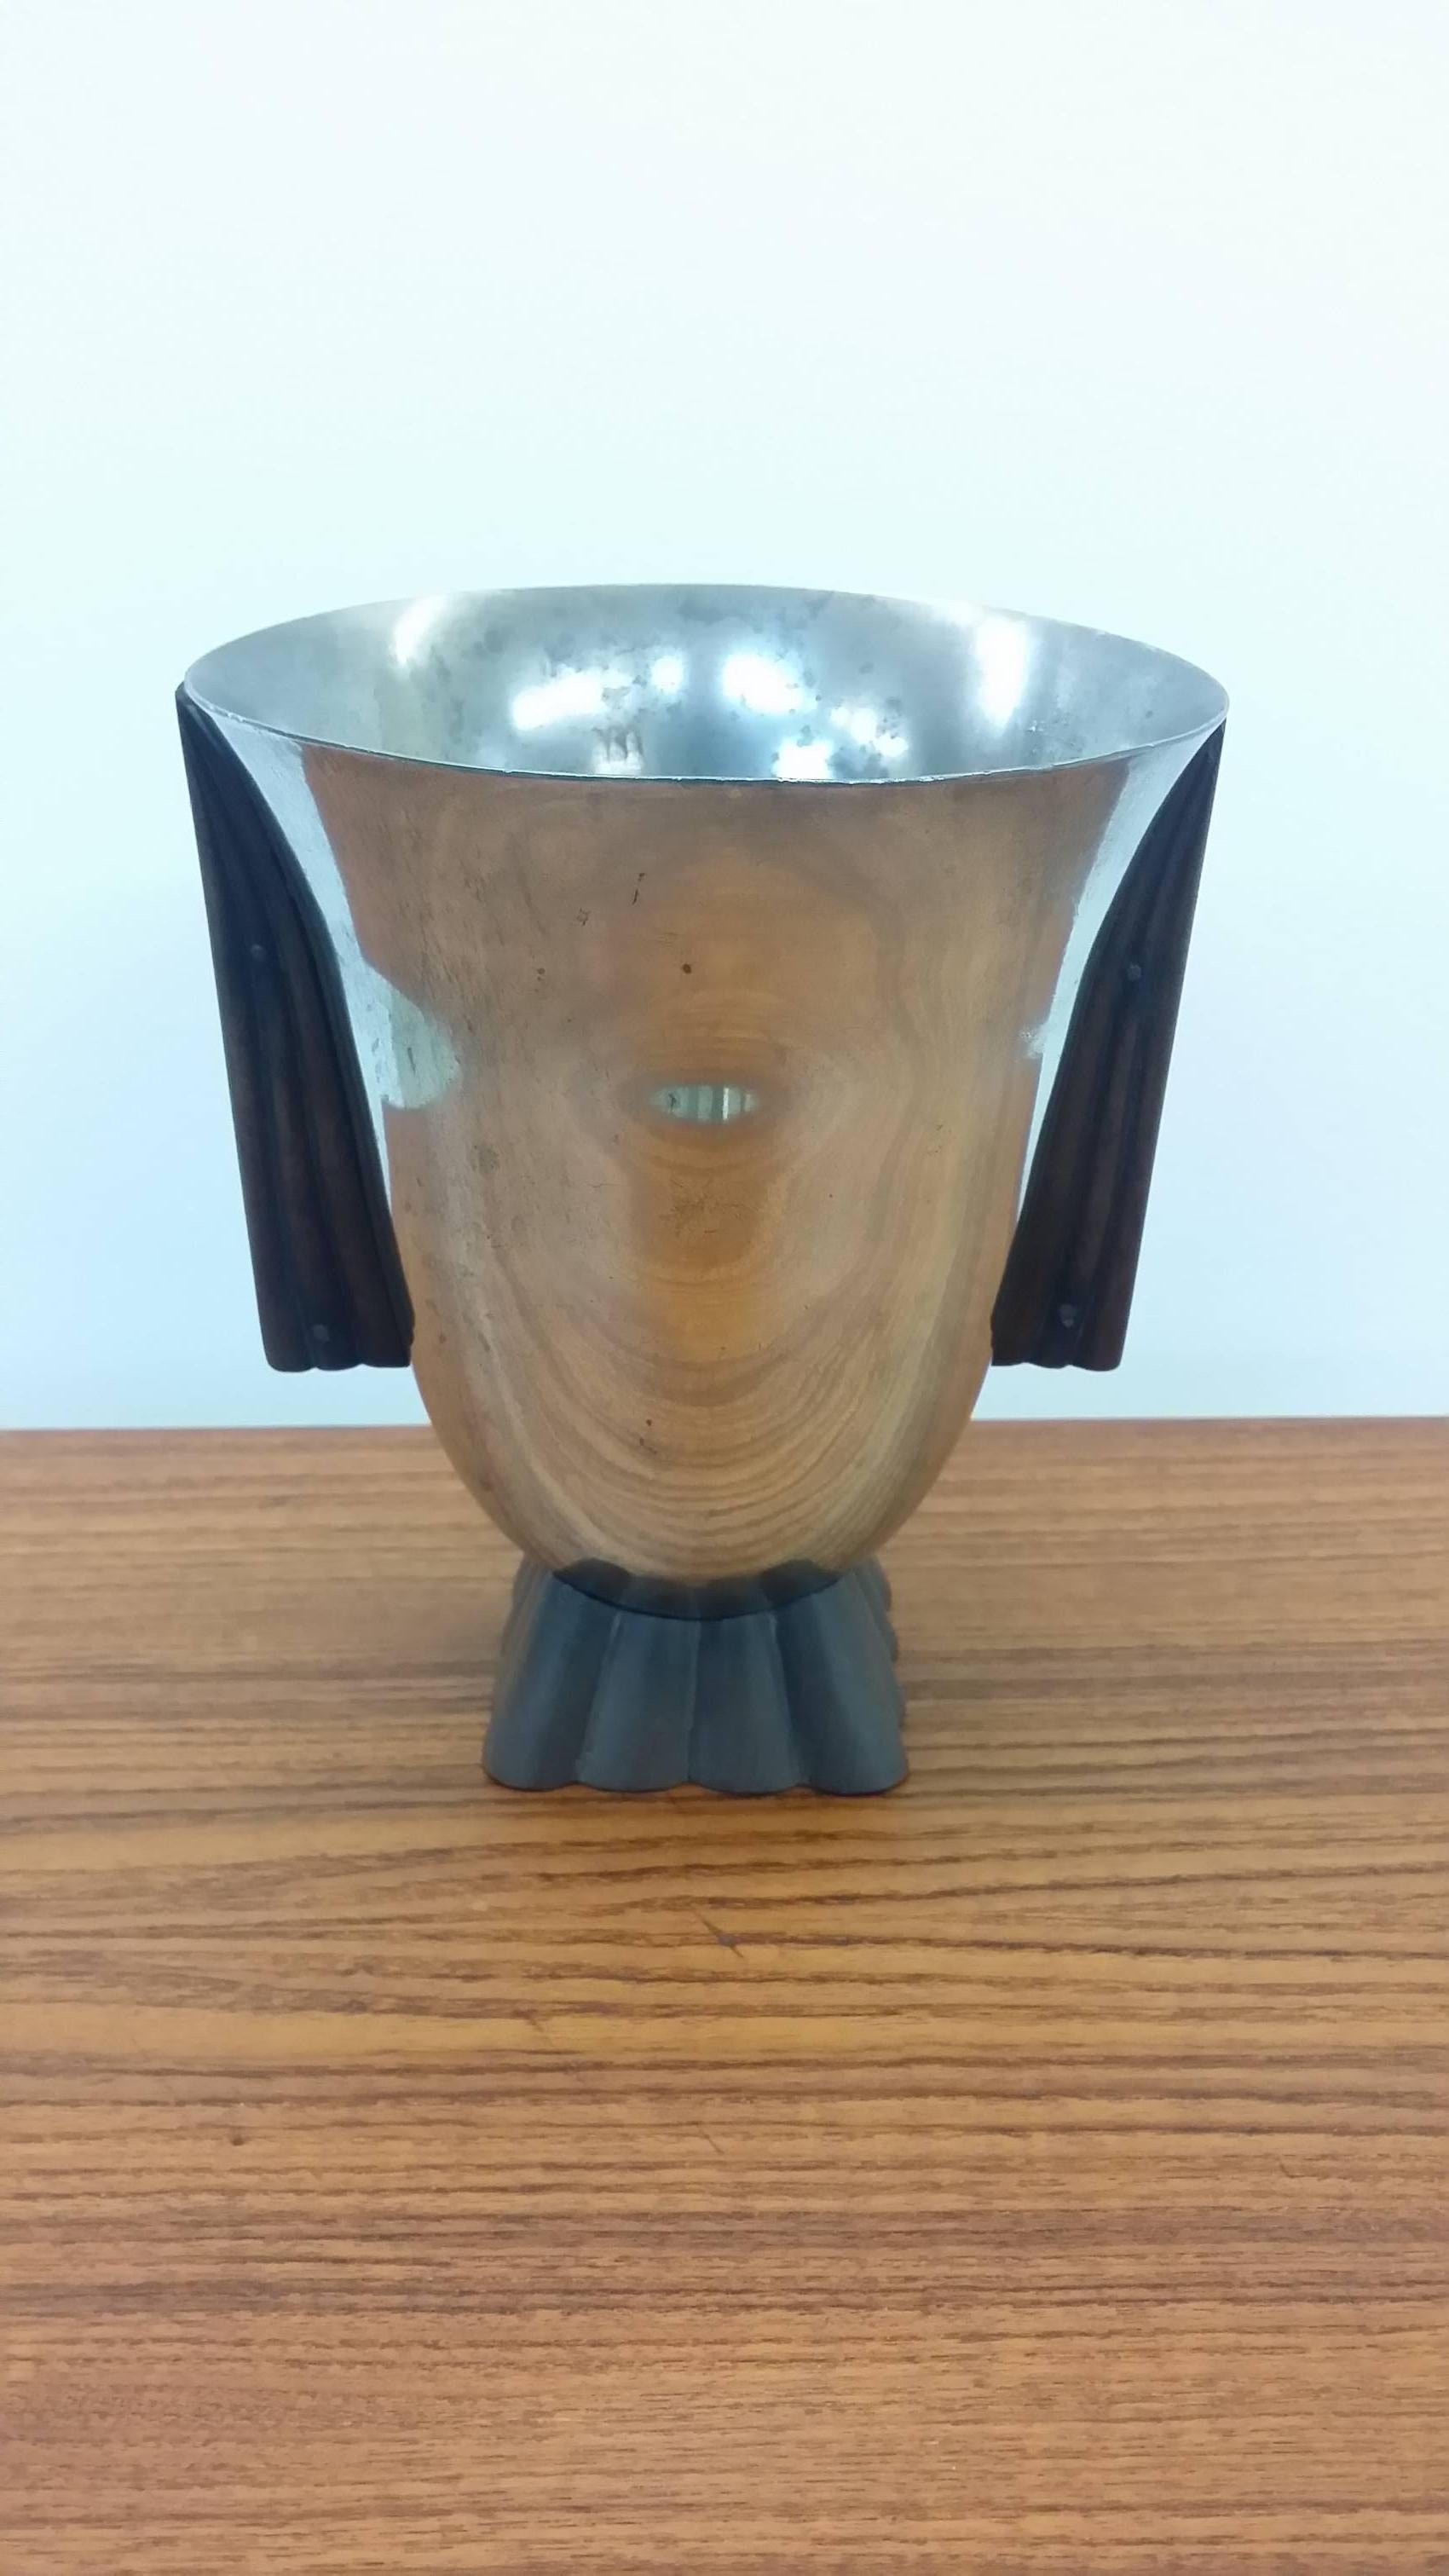 Art Deco Handcrafted Vessel by Donn Jefferson Sheets, circa 1936